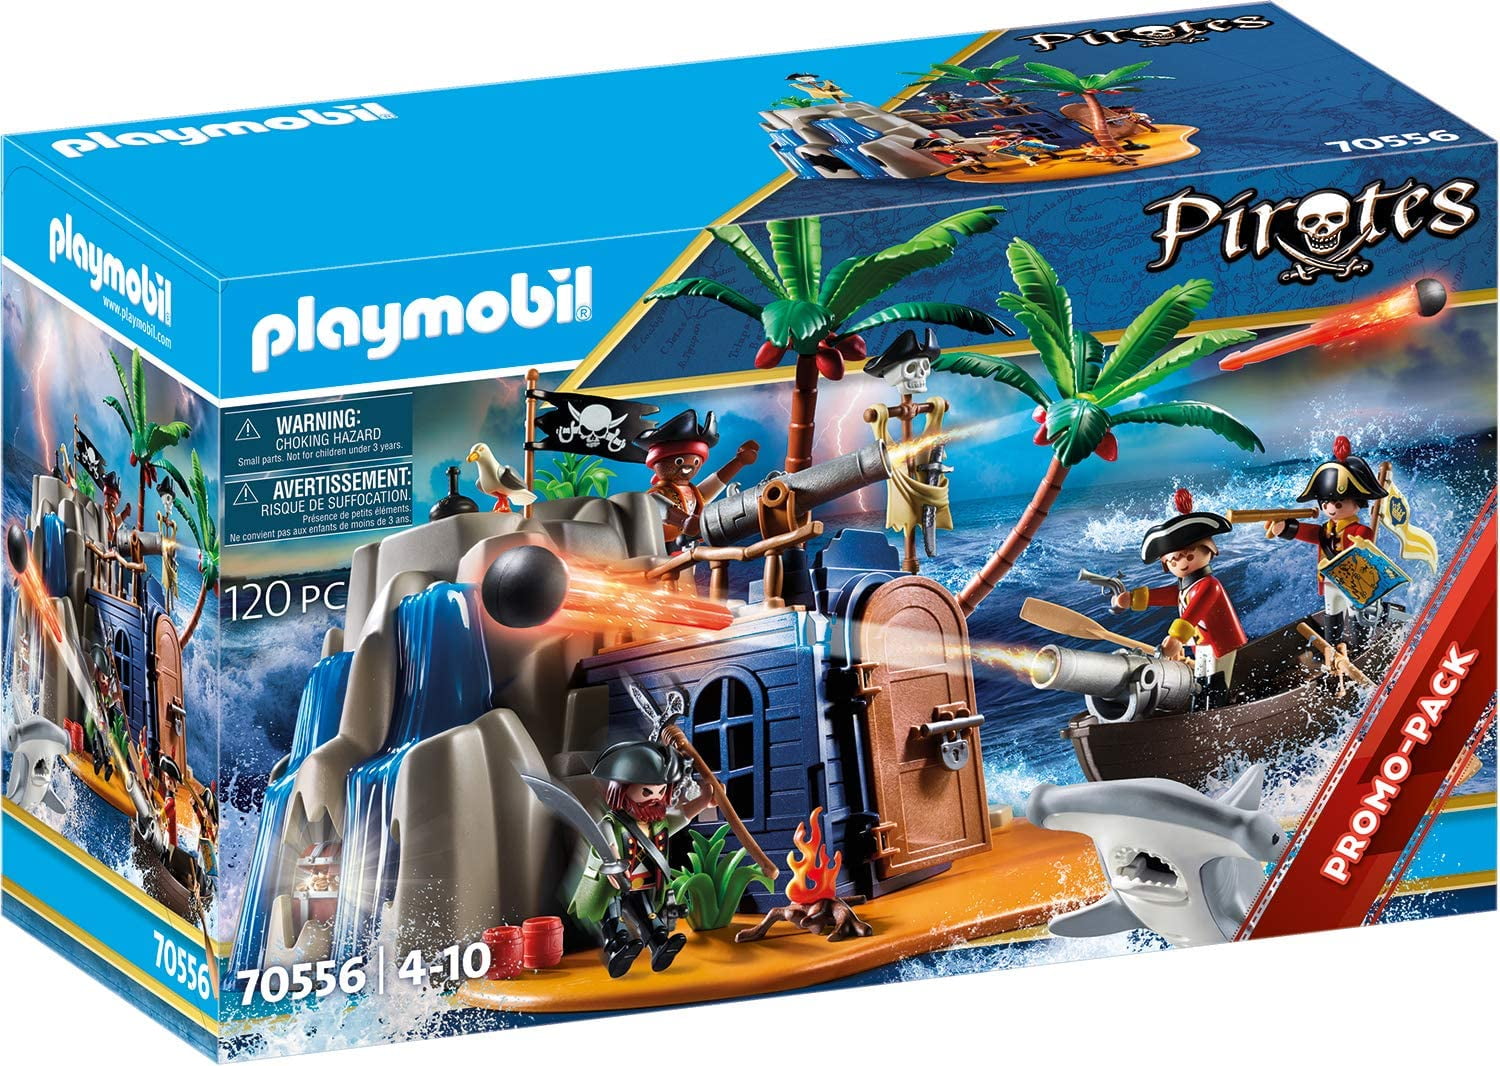 vold mønt Flyve drage PLAYMOBIL Pirates 70556 pirate island with treasure hiding place and  buoyant boat - Walmart.com